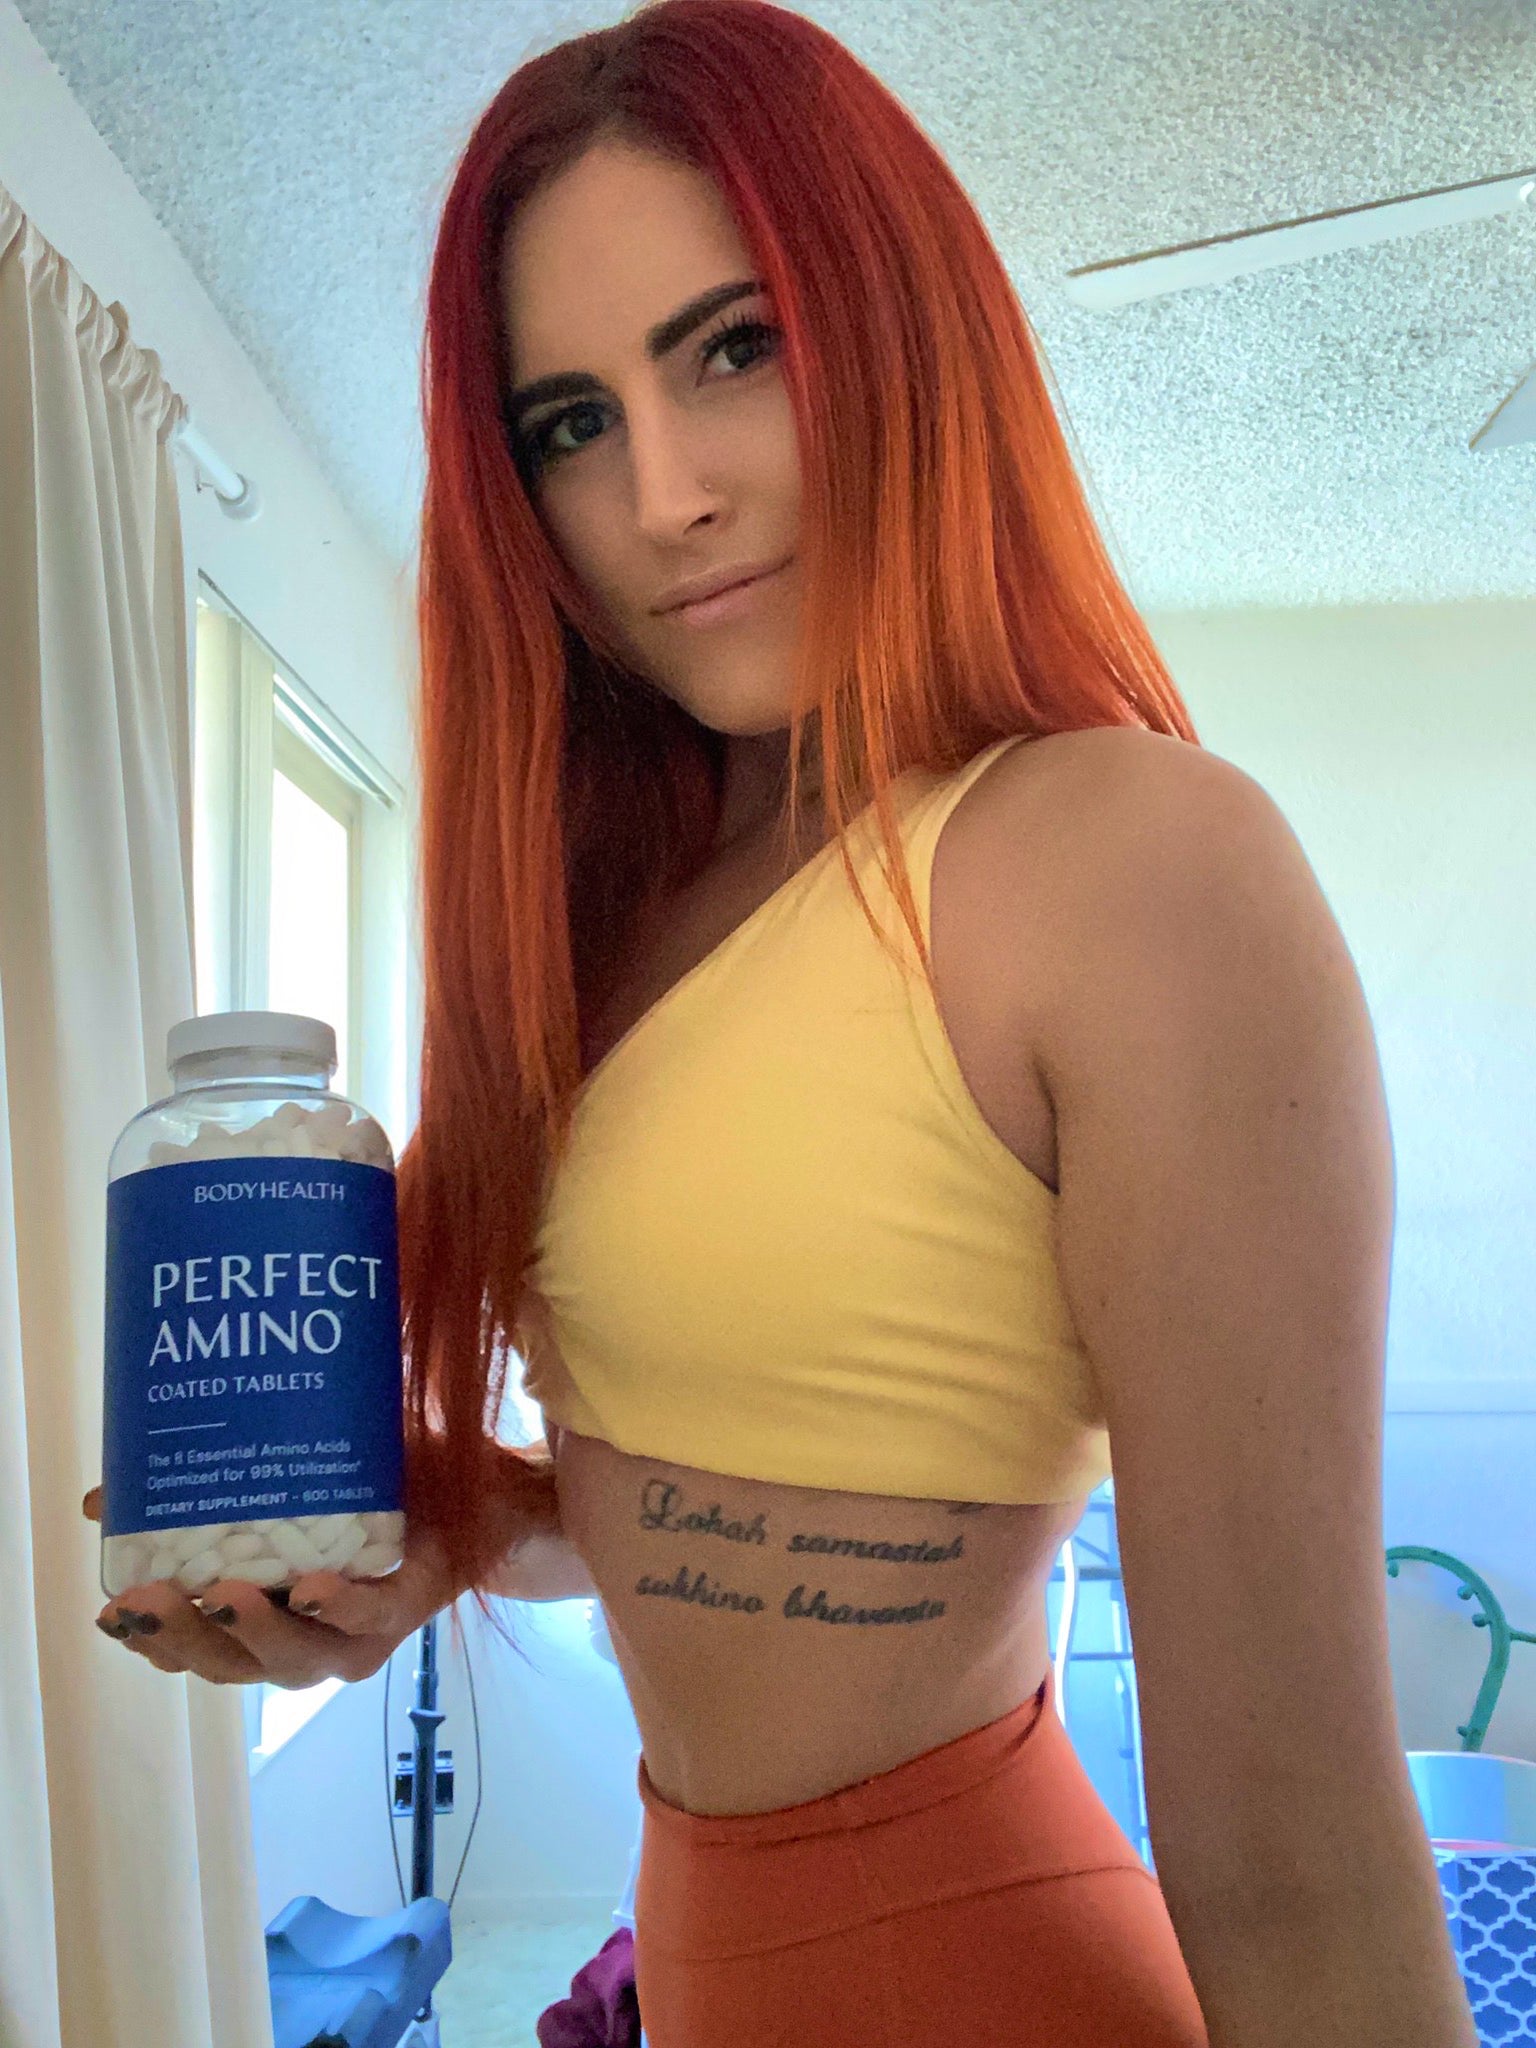 BodyHealth Woman Influencer holding PerfectAmino 150 count bottle of tablets for toned and lean muscle